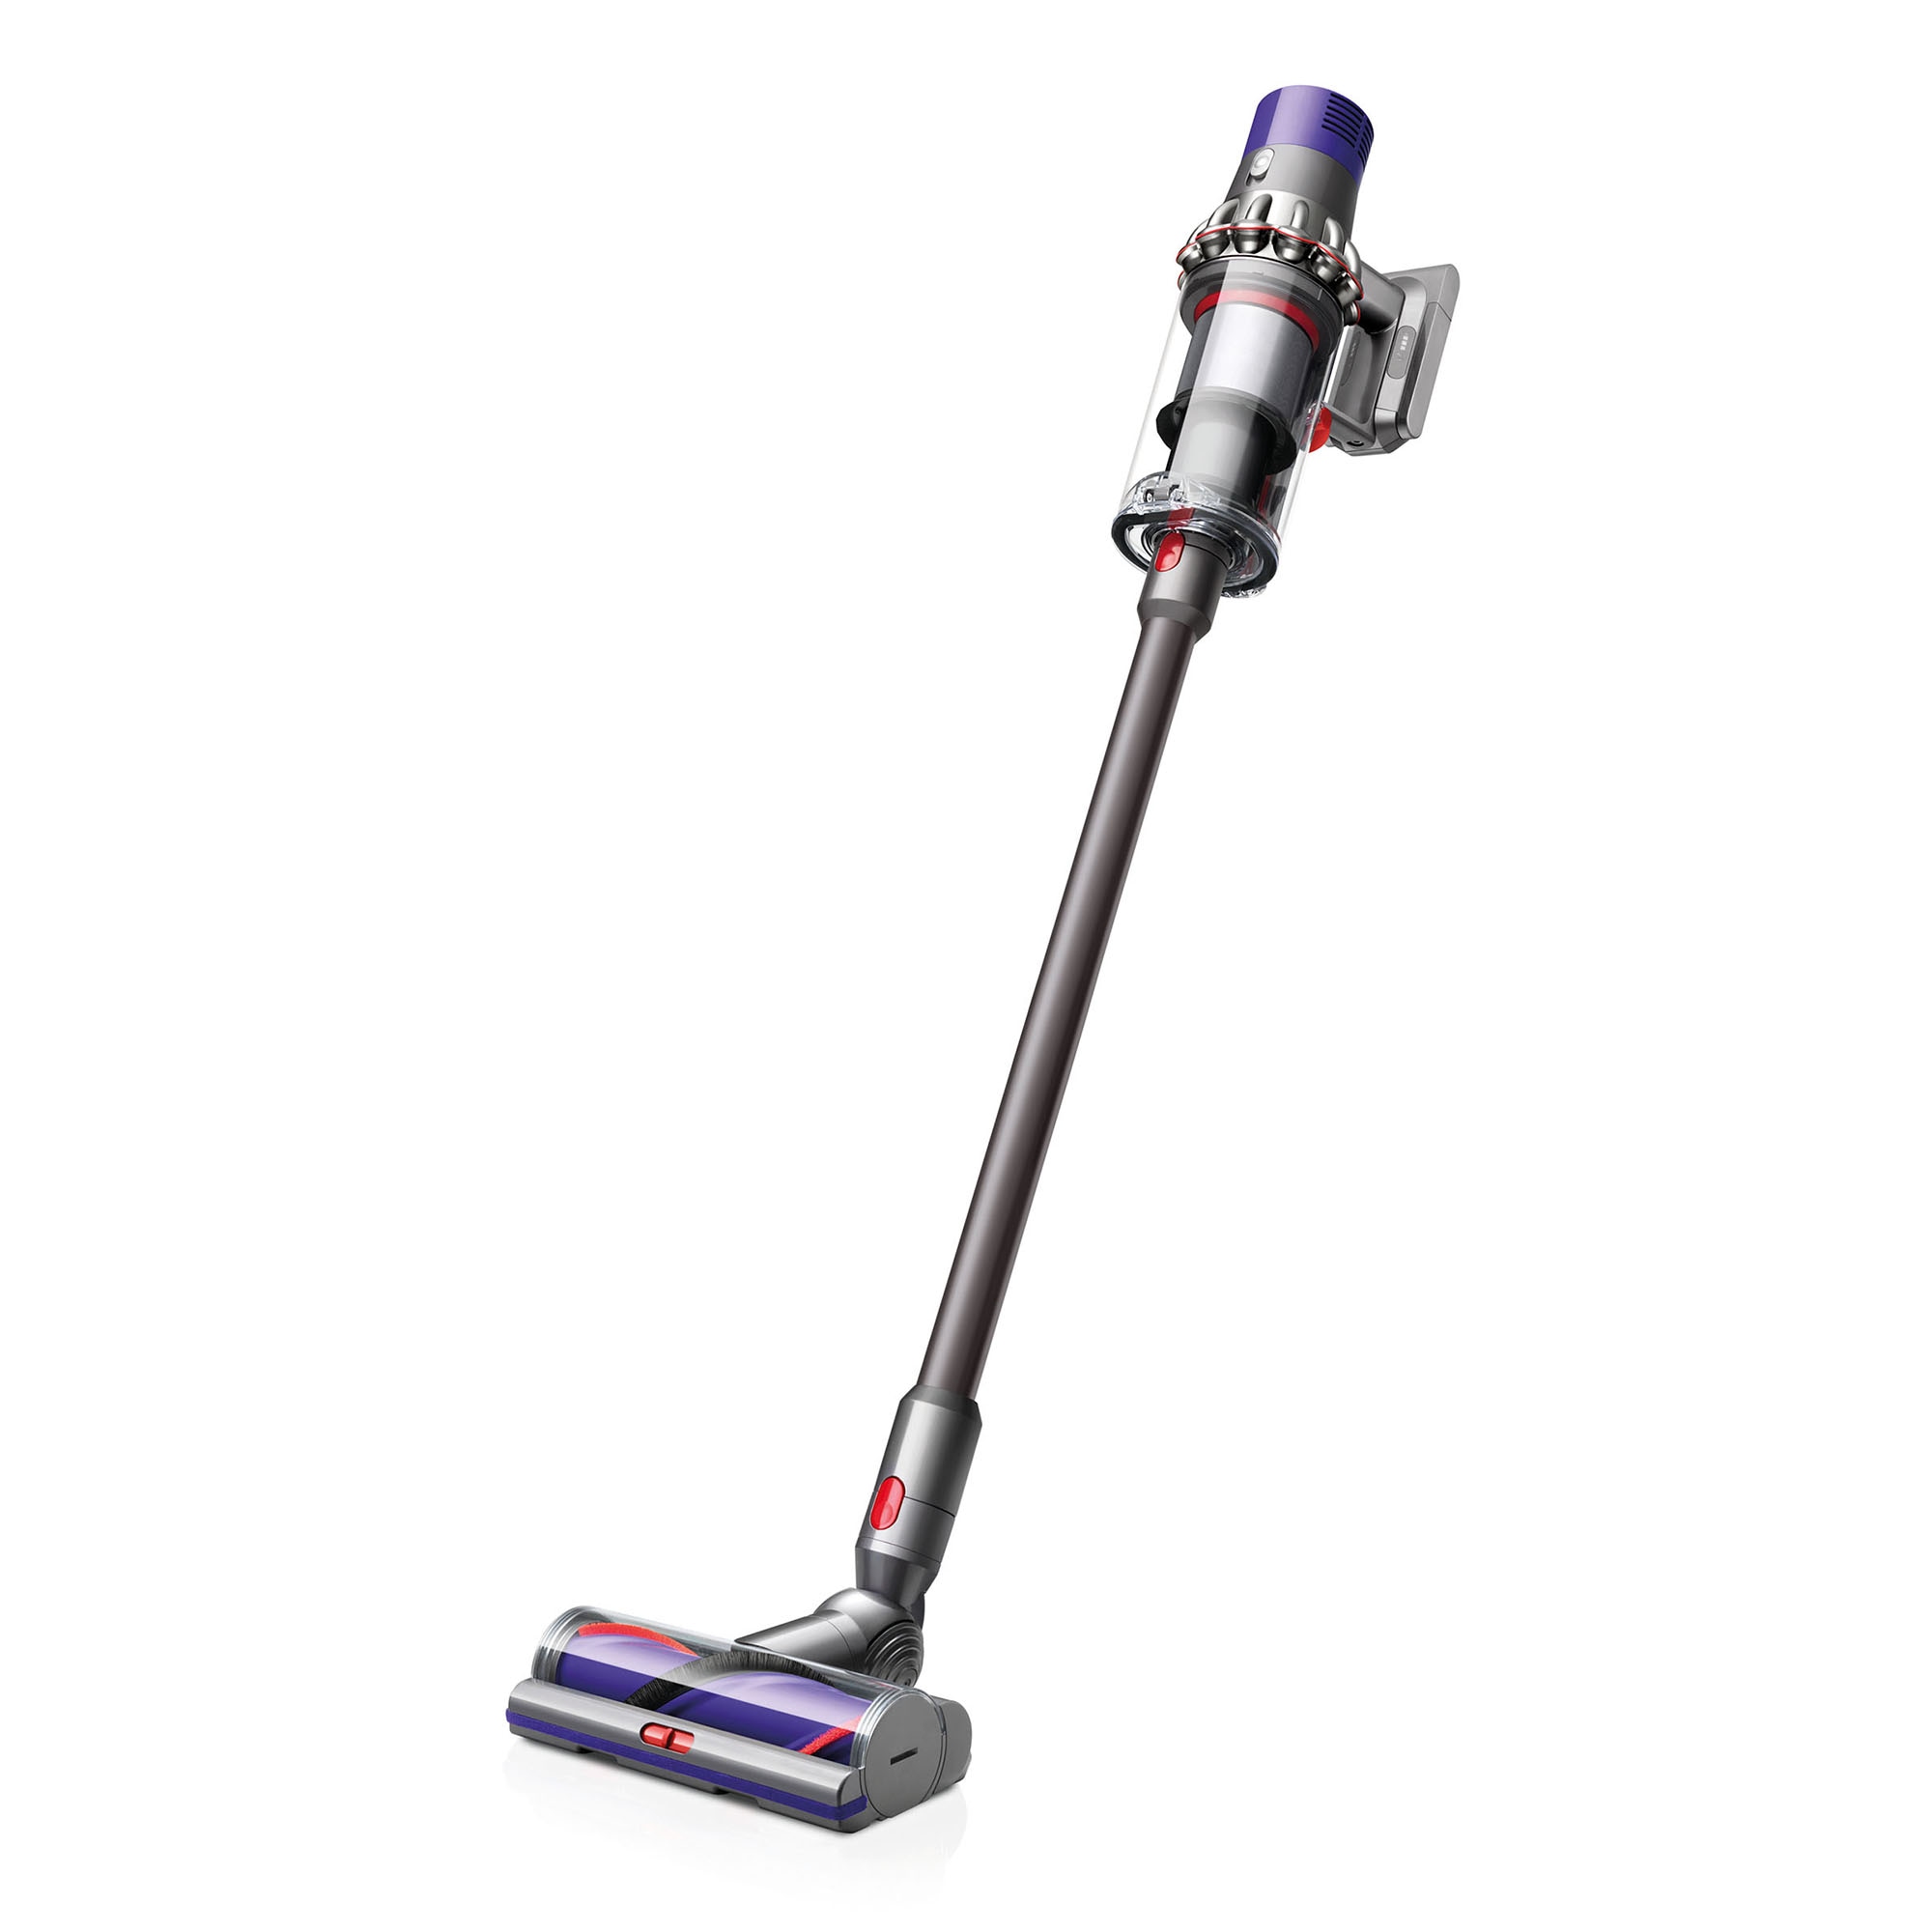 Make Post-Holiday Cleanup a Breeze With 40% Off the Dyson V12